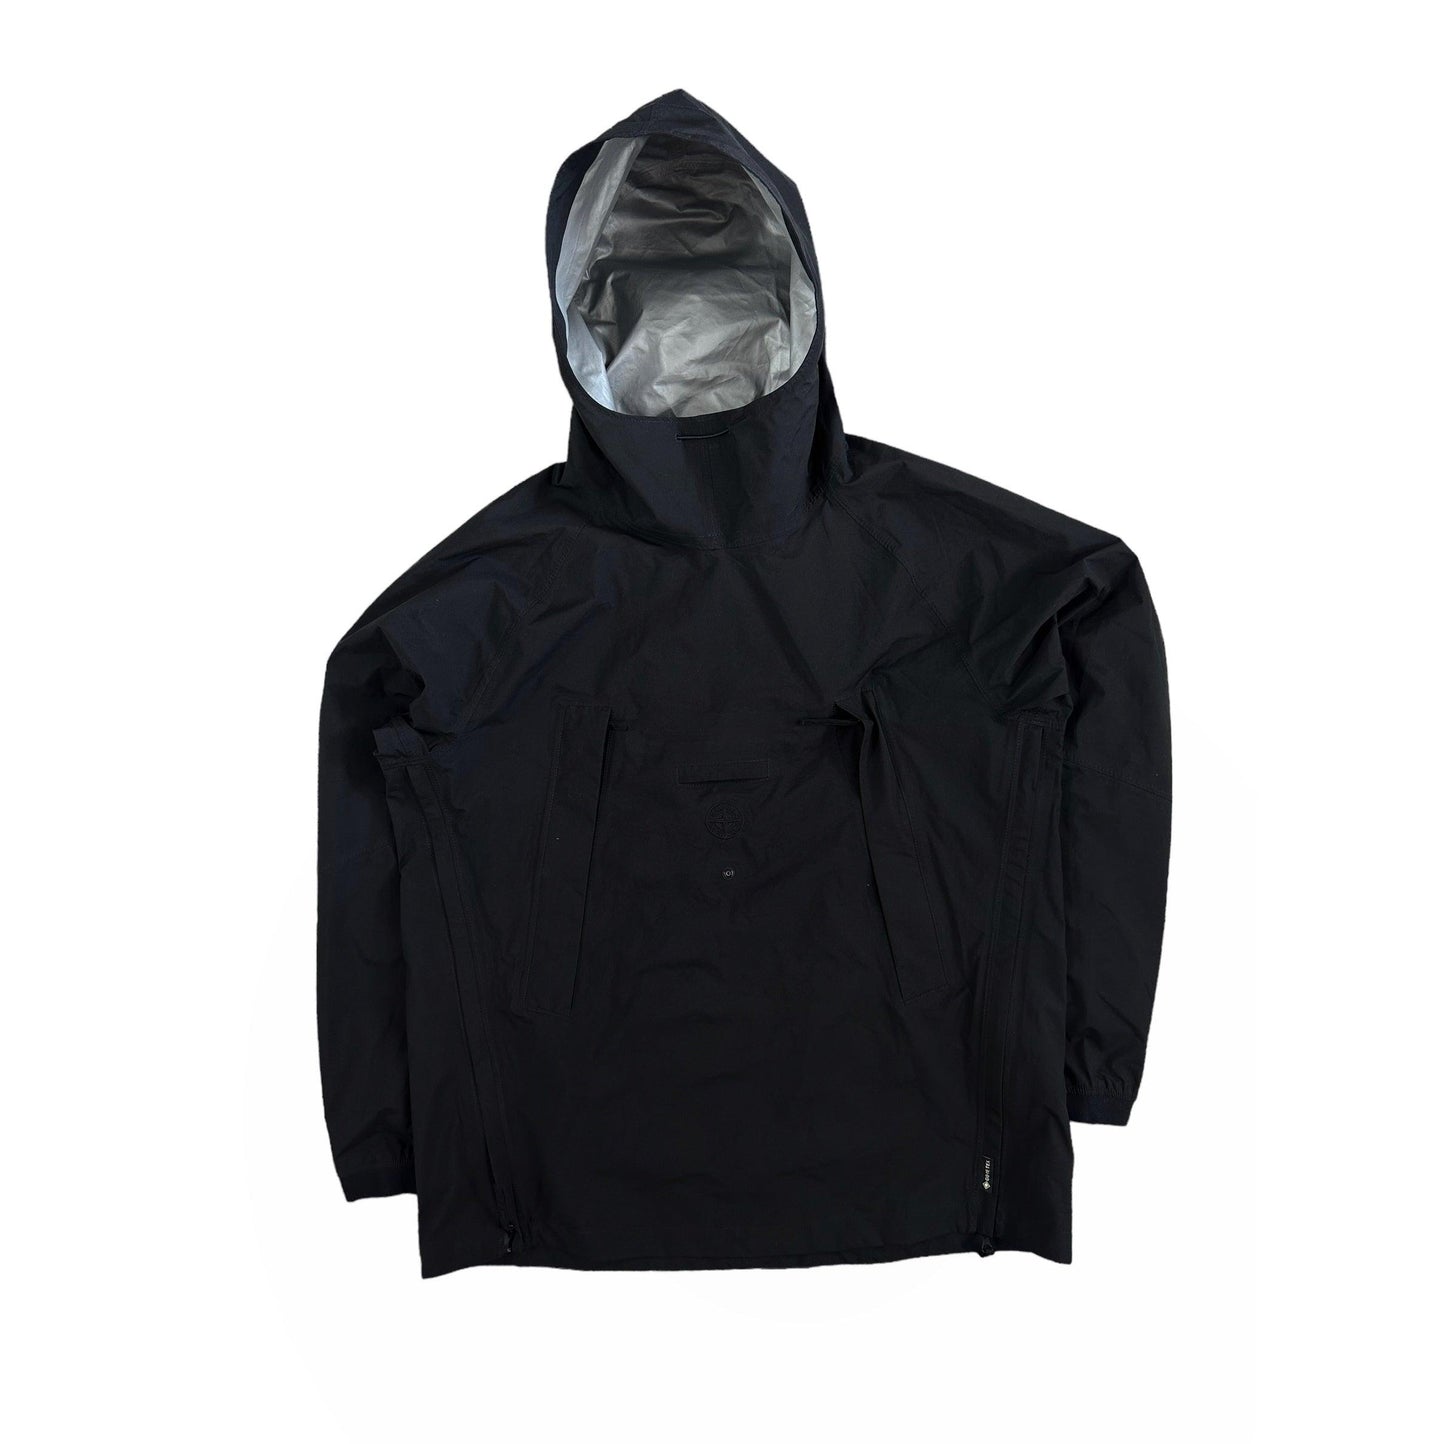 Stone Island 3 in 1 Anorak Goretex Jacket with Bag & Gilet - Known Source